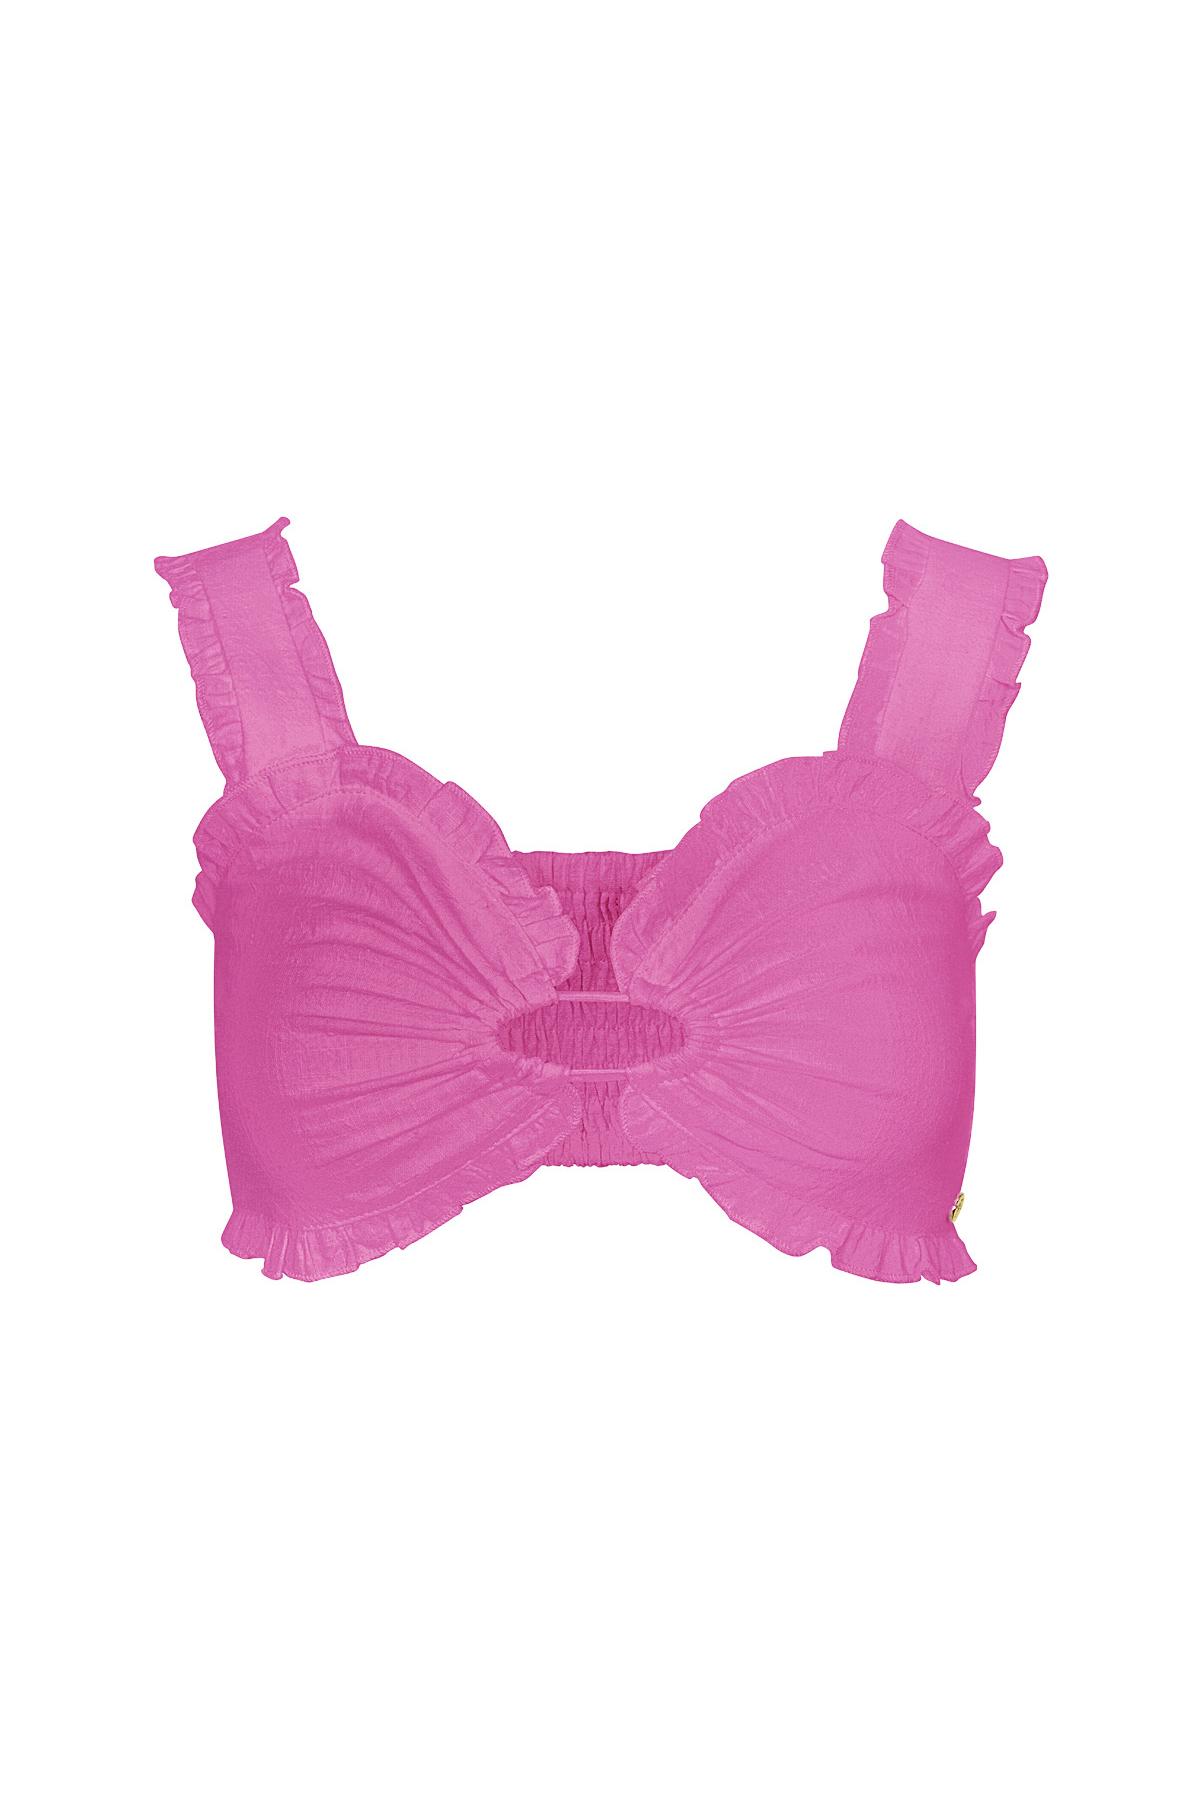 Crop top cut out - pink M h5 